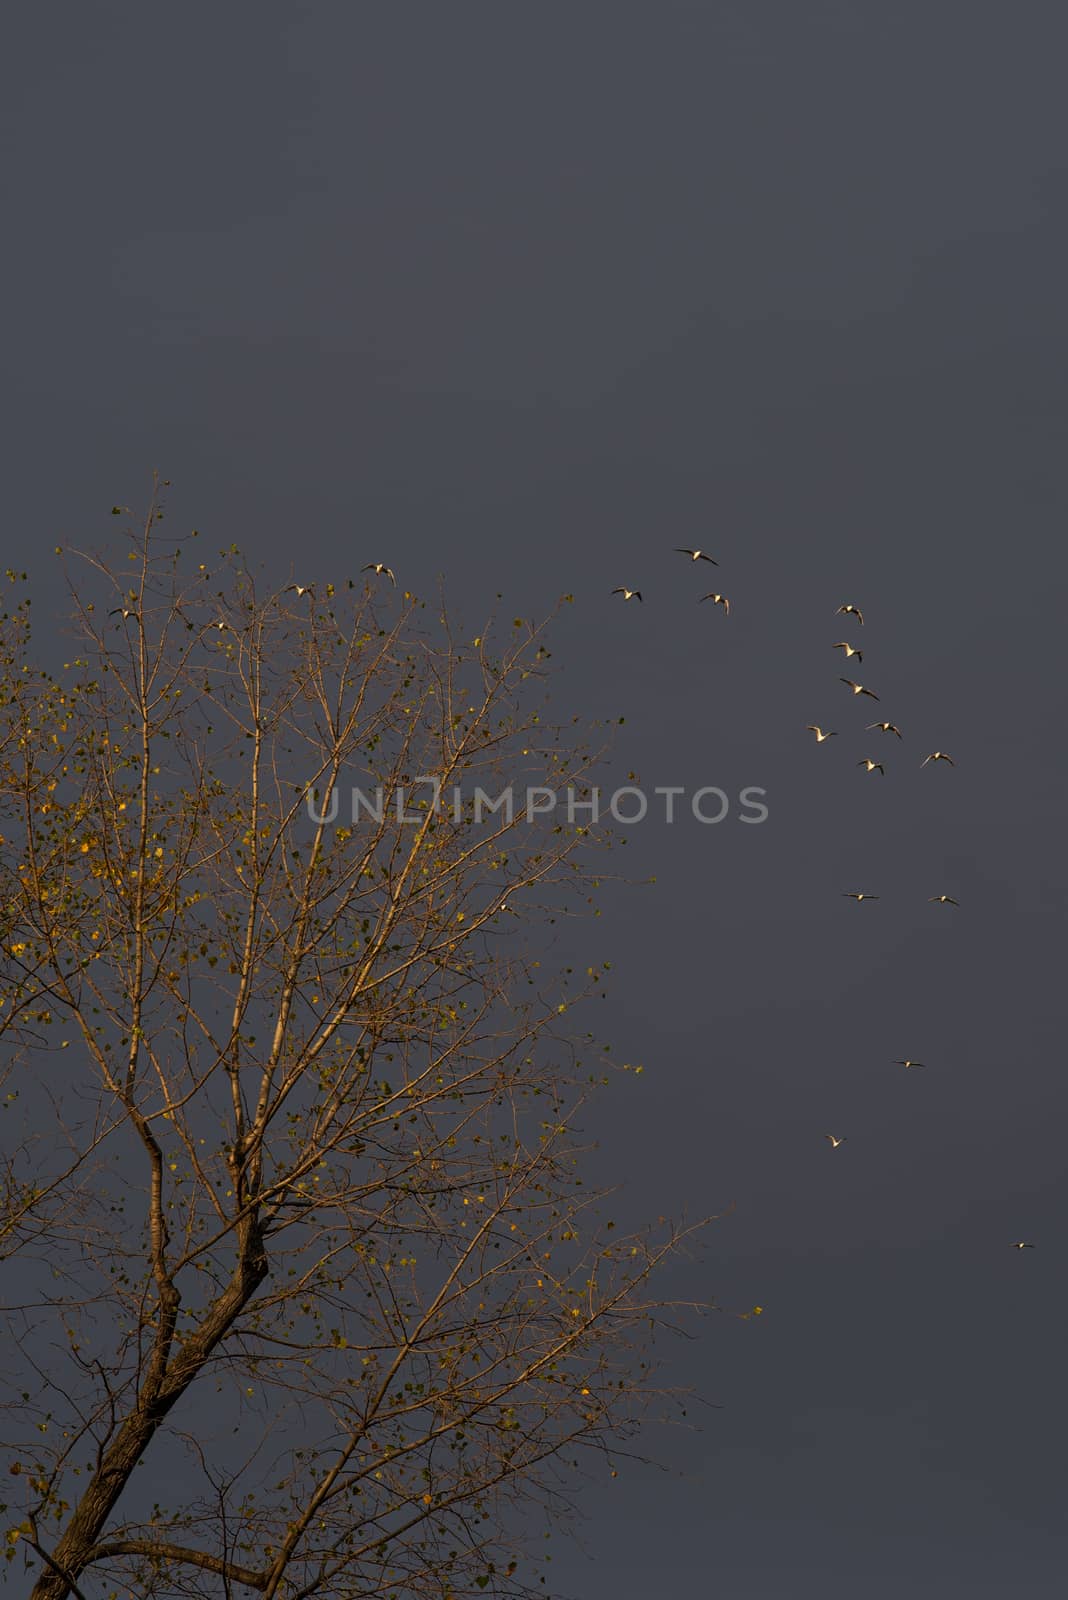 Yellow treetop with flying birds with a storm sky by gonzalobell